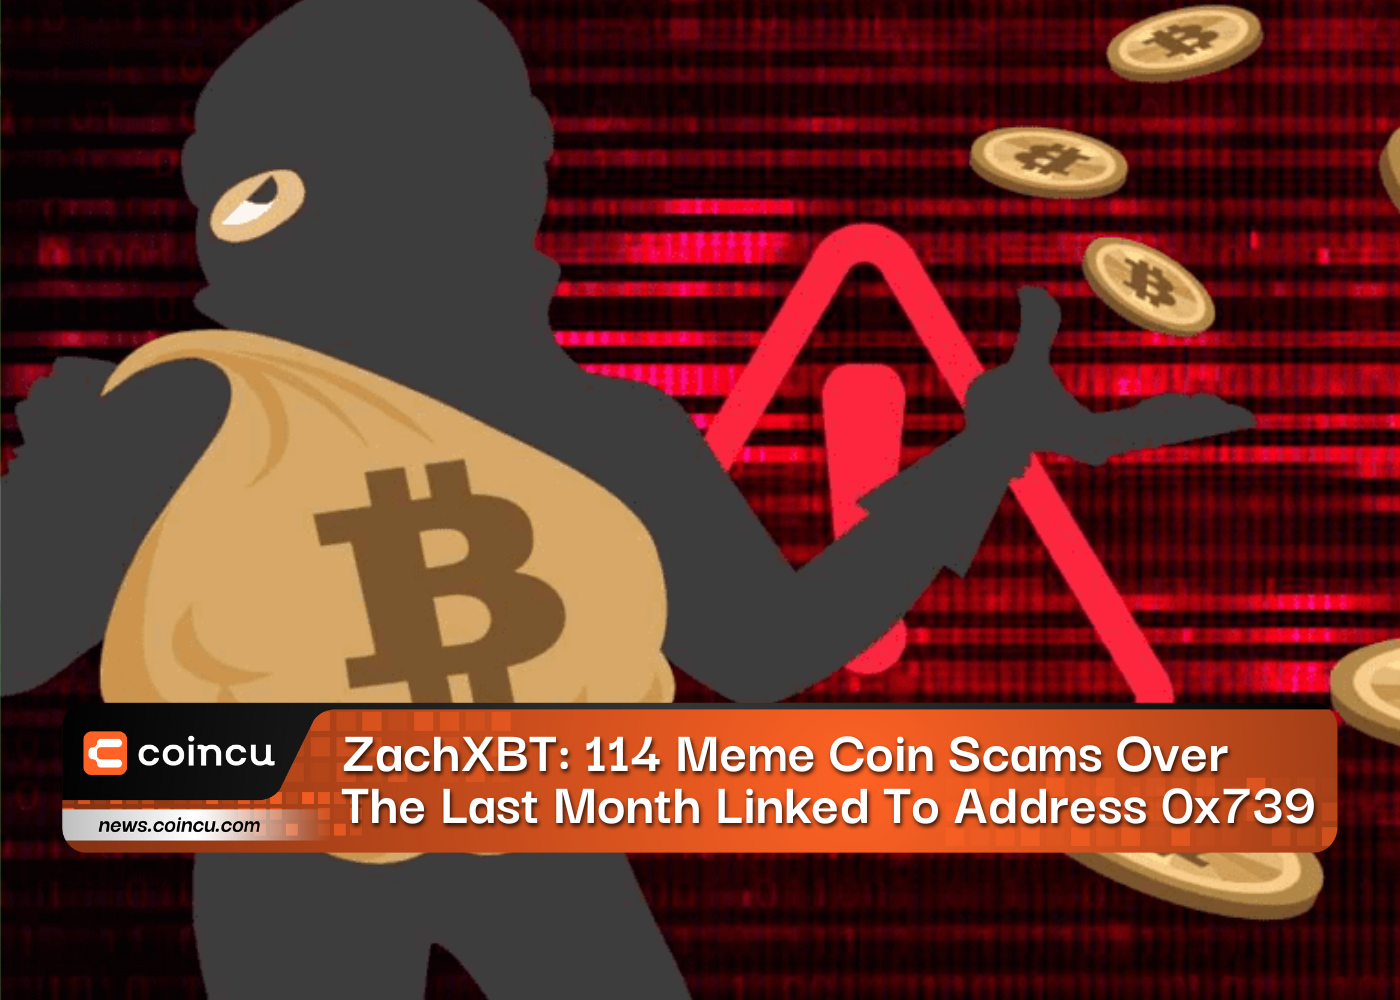 ZachXBT: 114 Meme Coin Scams Over The Last Month Linked To Address 0x739